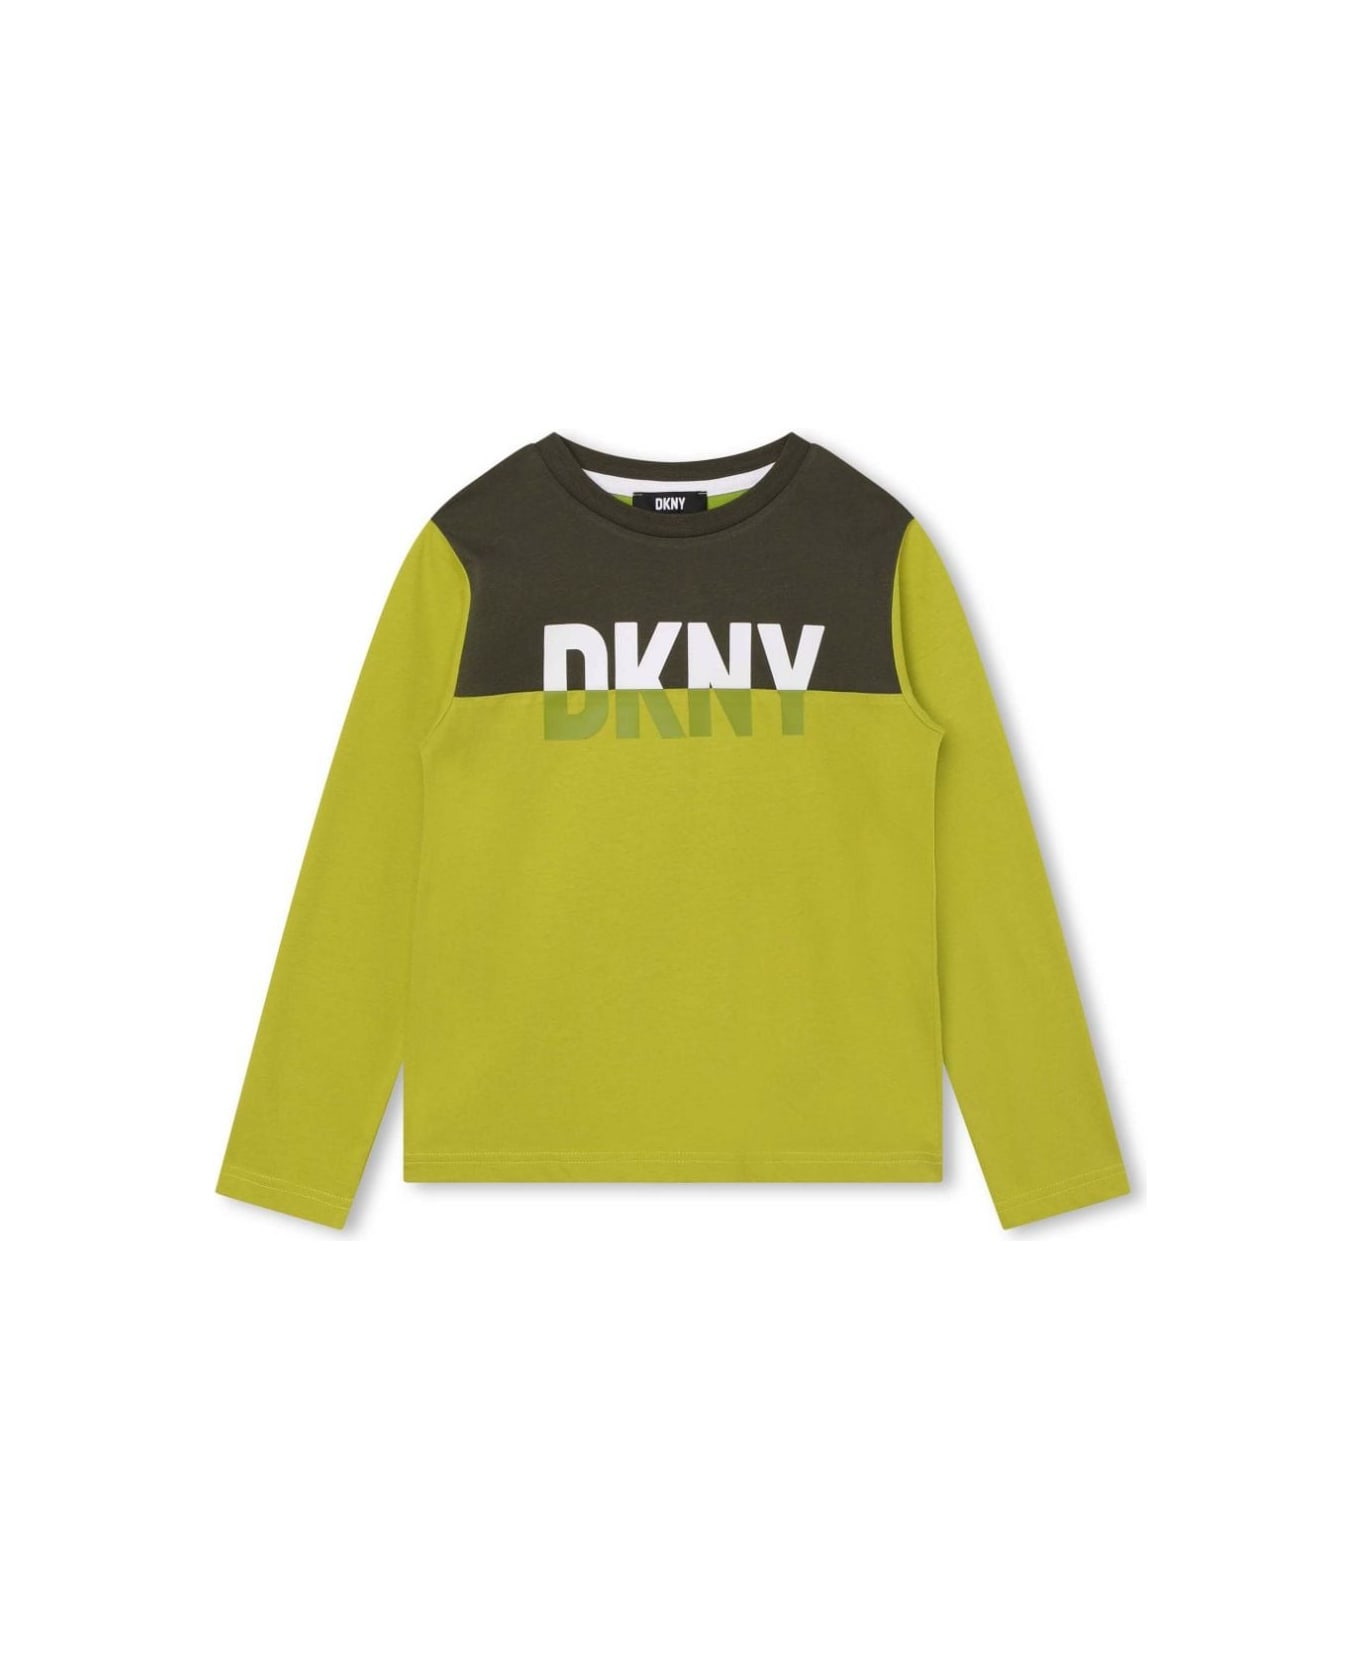 DKNY T-shirt Verde Con Pannelli A Contrasto Bambino - Verde Tシャツ＆ポロシャツ